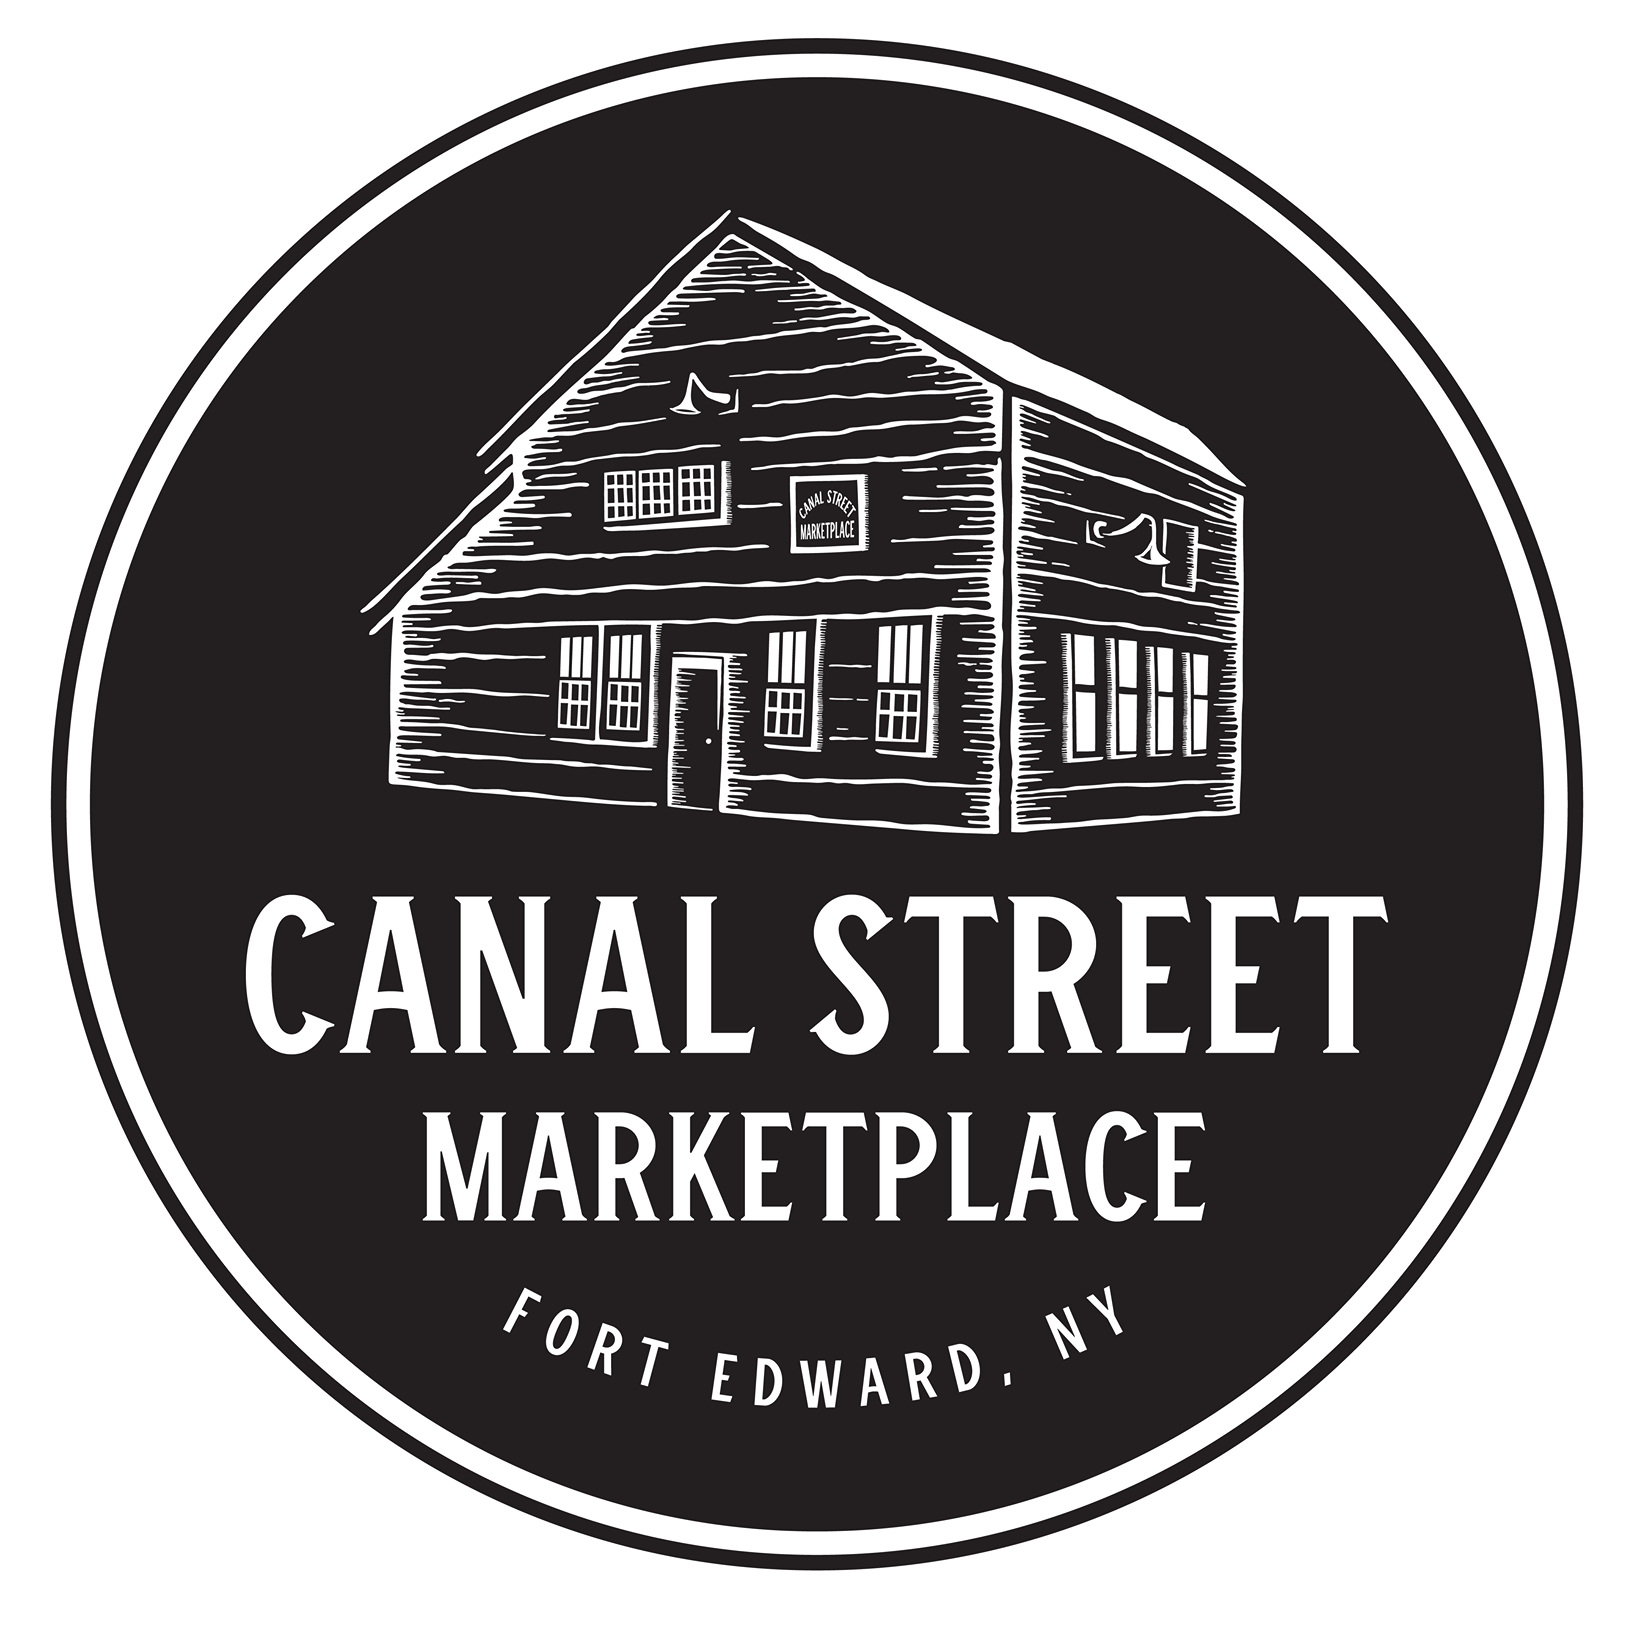 Canal Street Marketplace